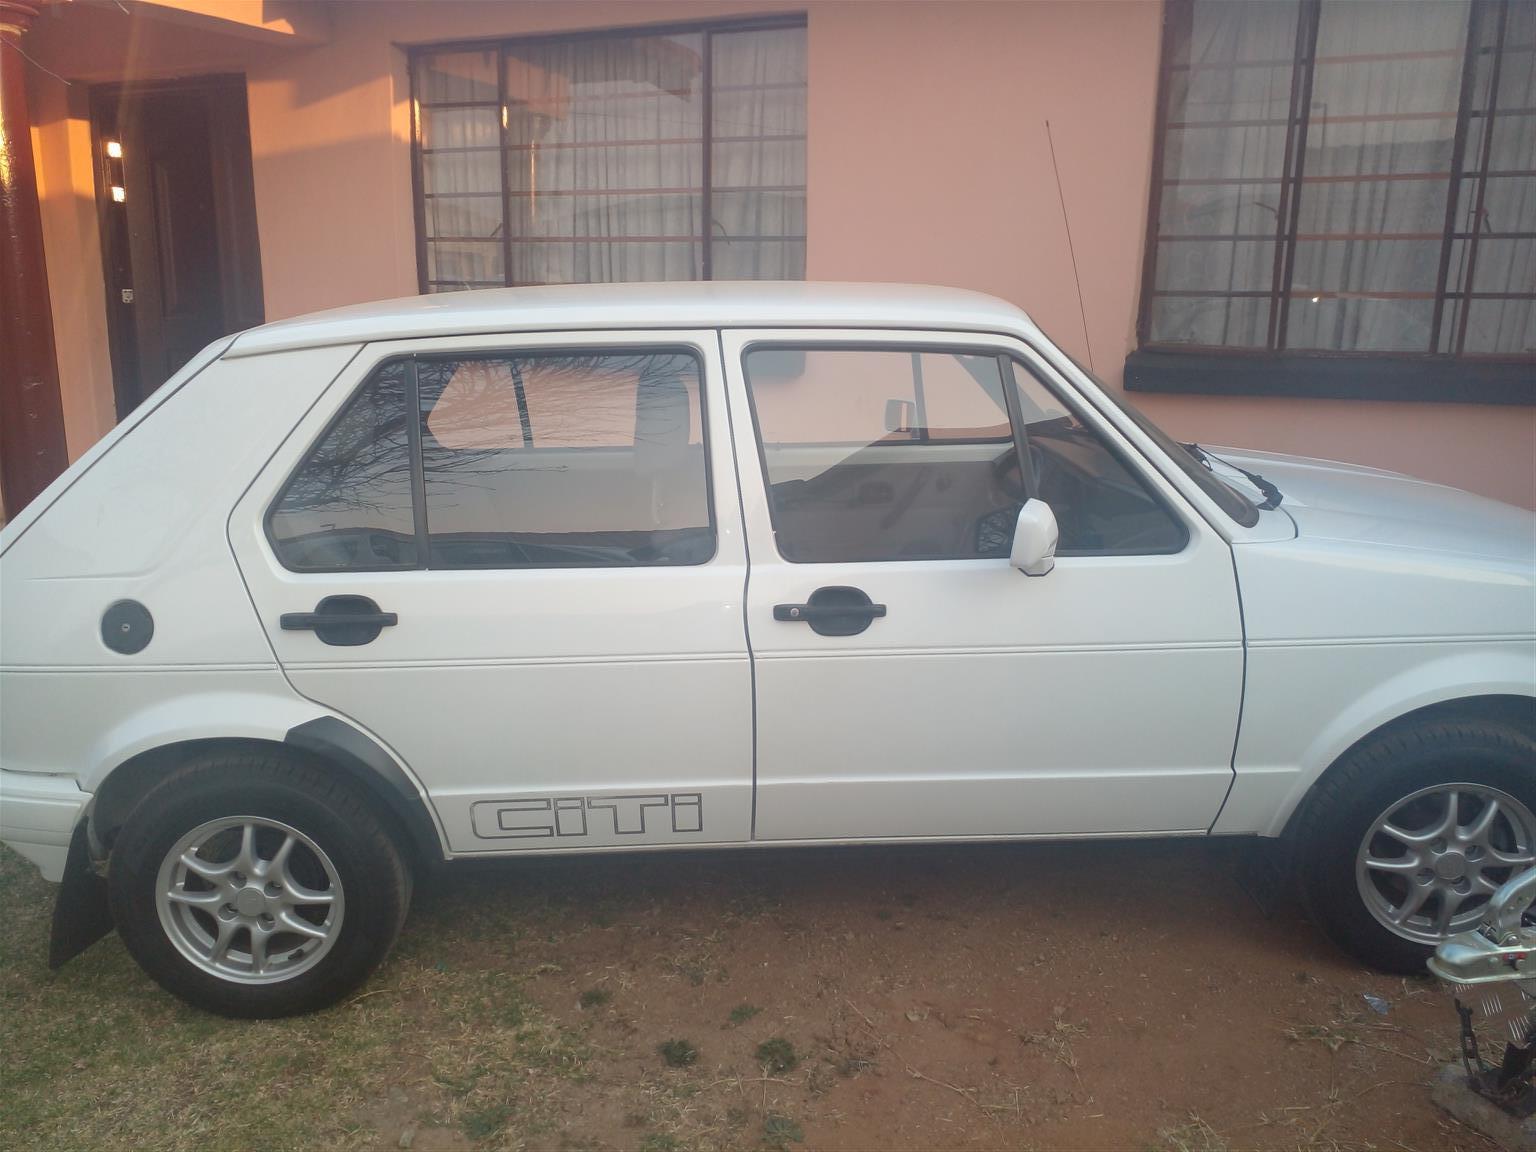 VW CIT GOLF FOR SALE (IN VERY GOOD CONDITION,WITH LOW KILOMETER)